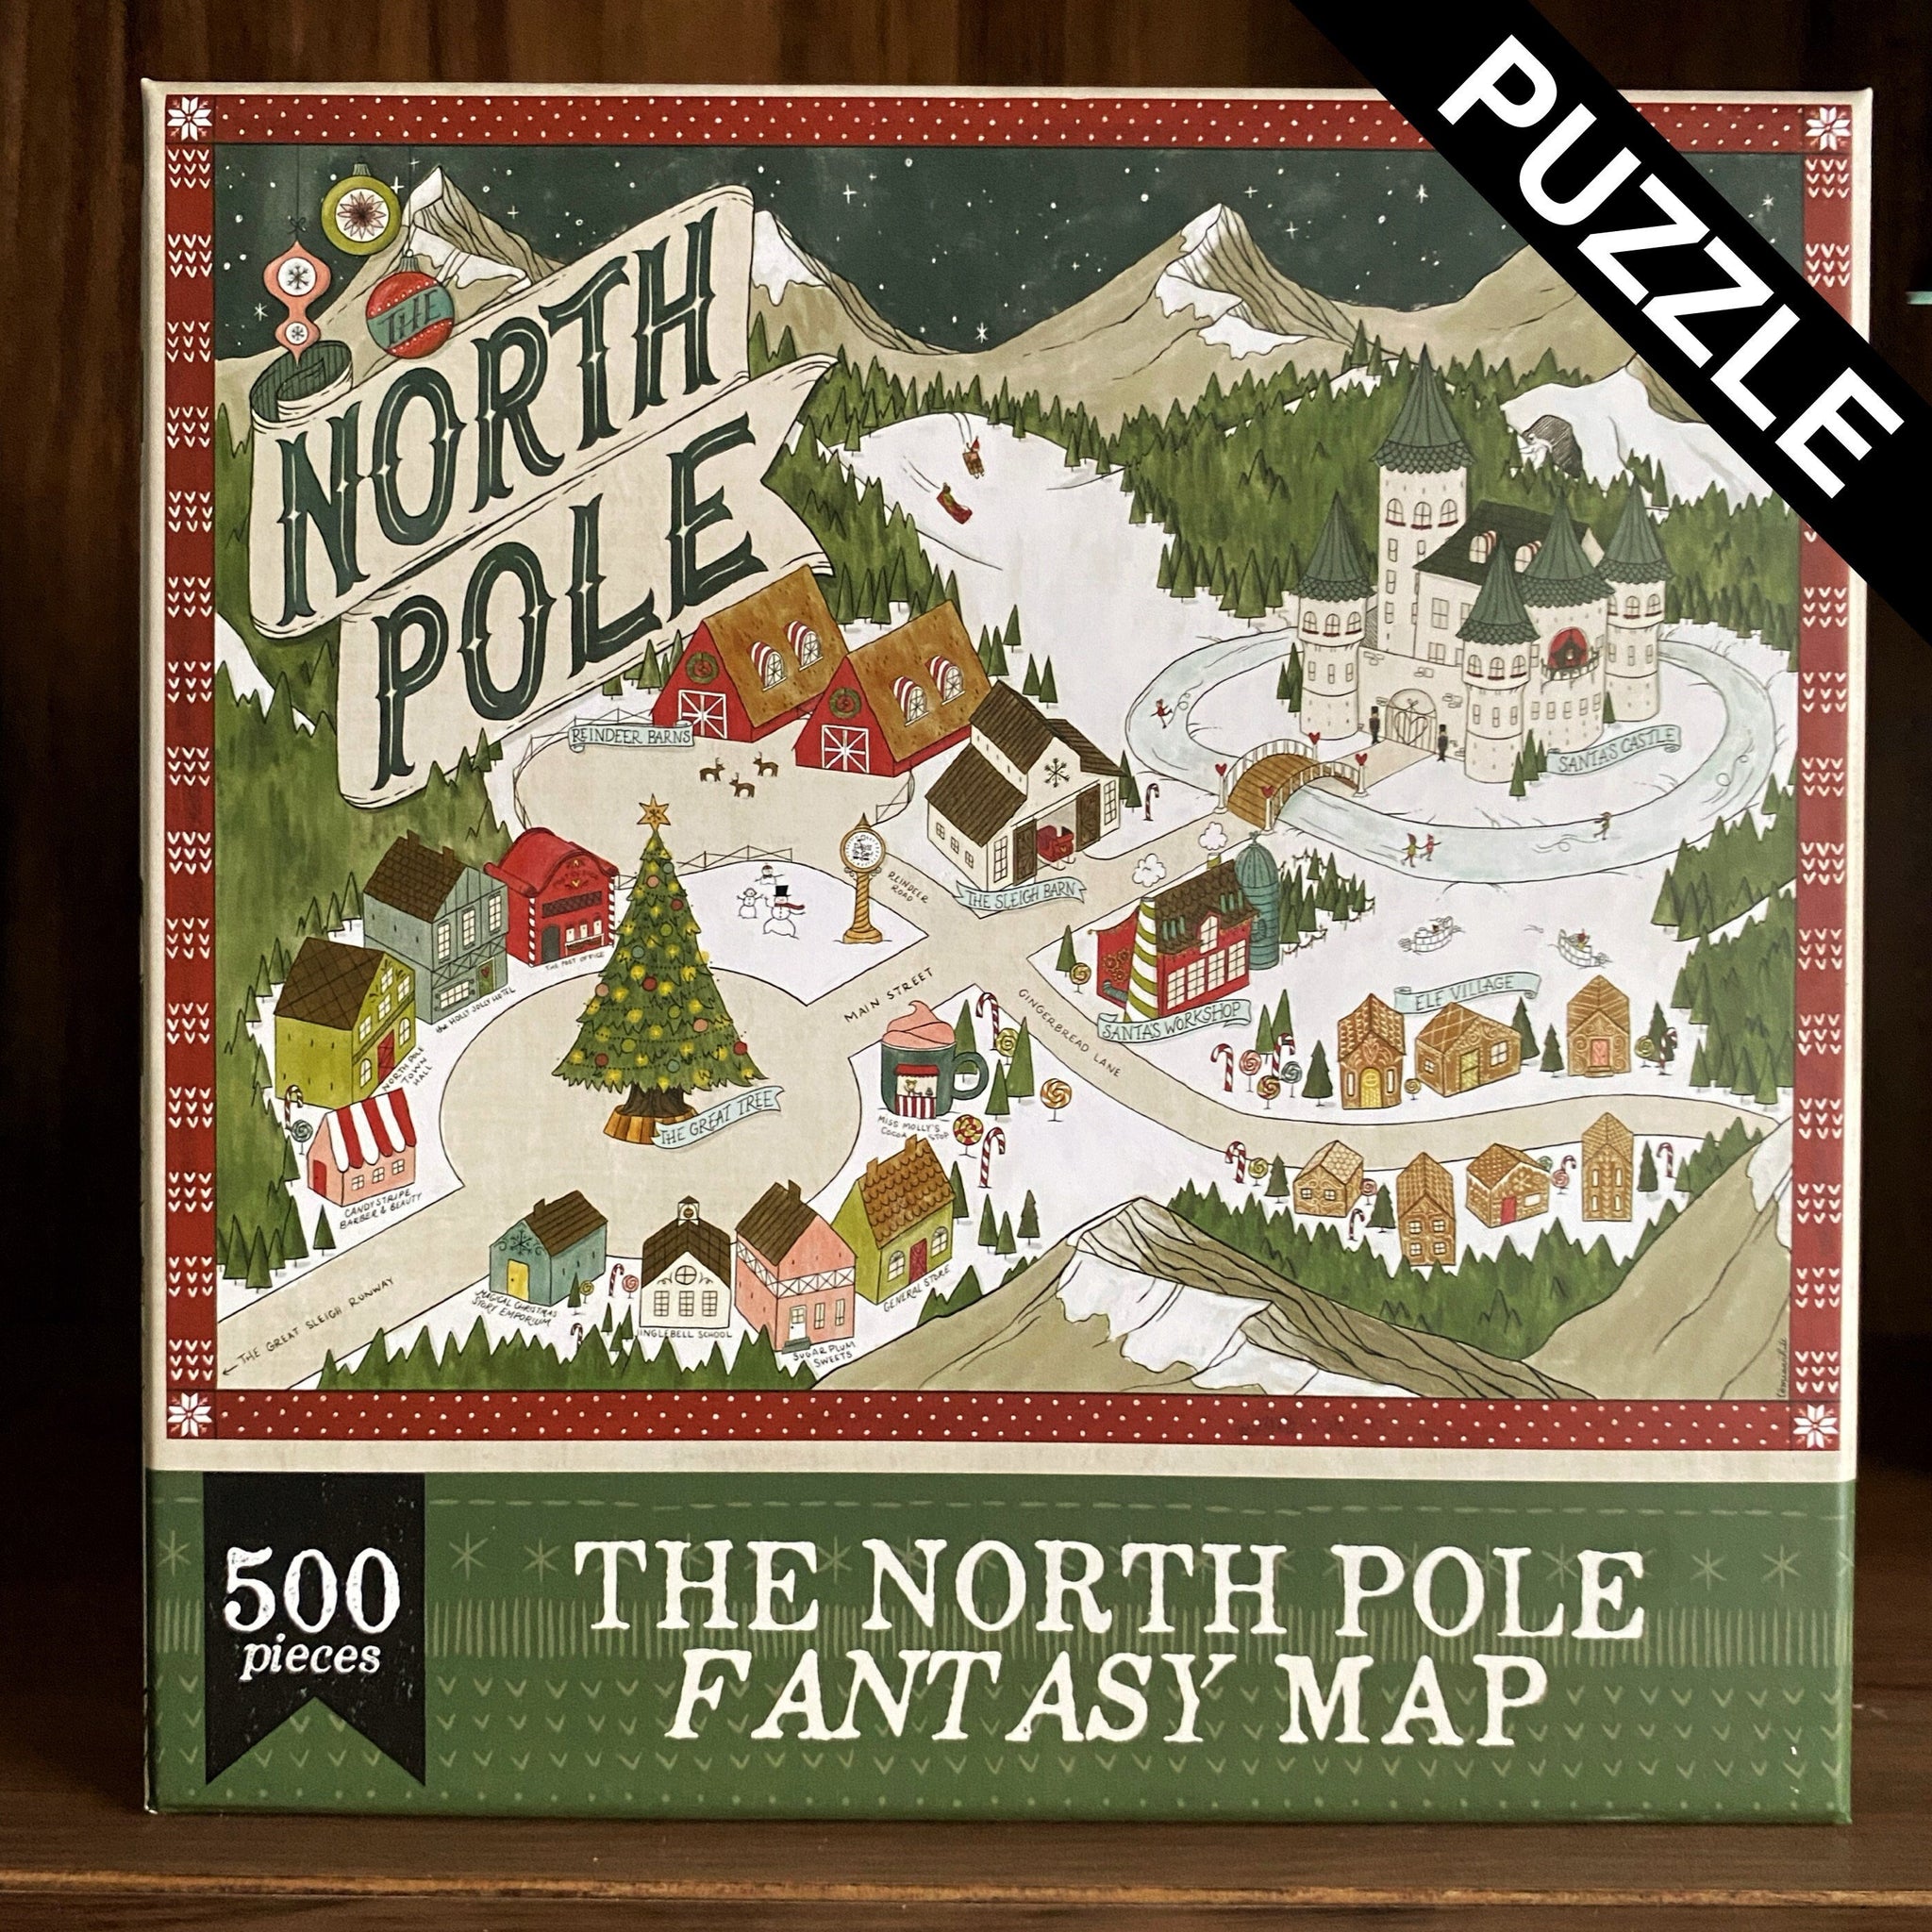 Image shows a 500 piece puzzle with a hand-drawn fantasy-style map of the North Pole at Christmas